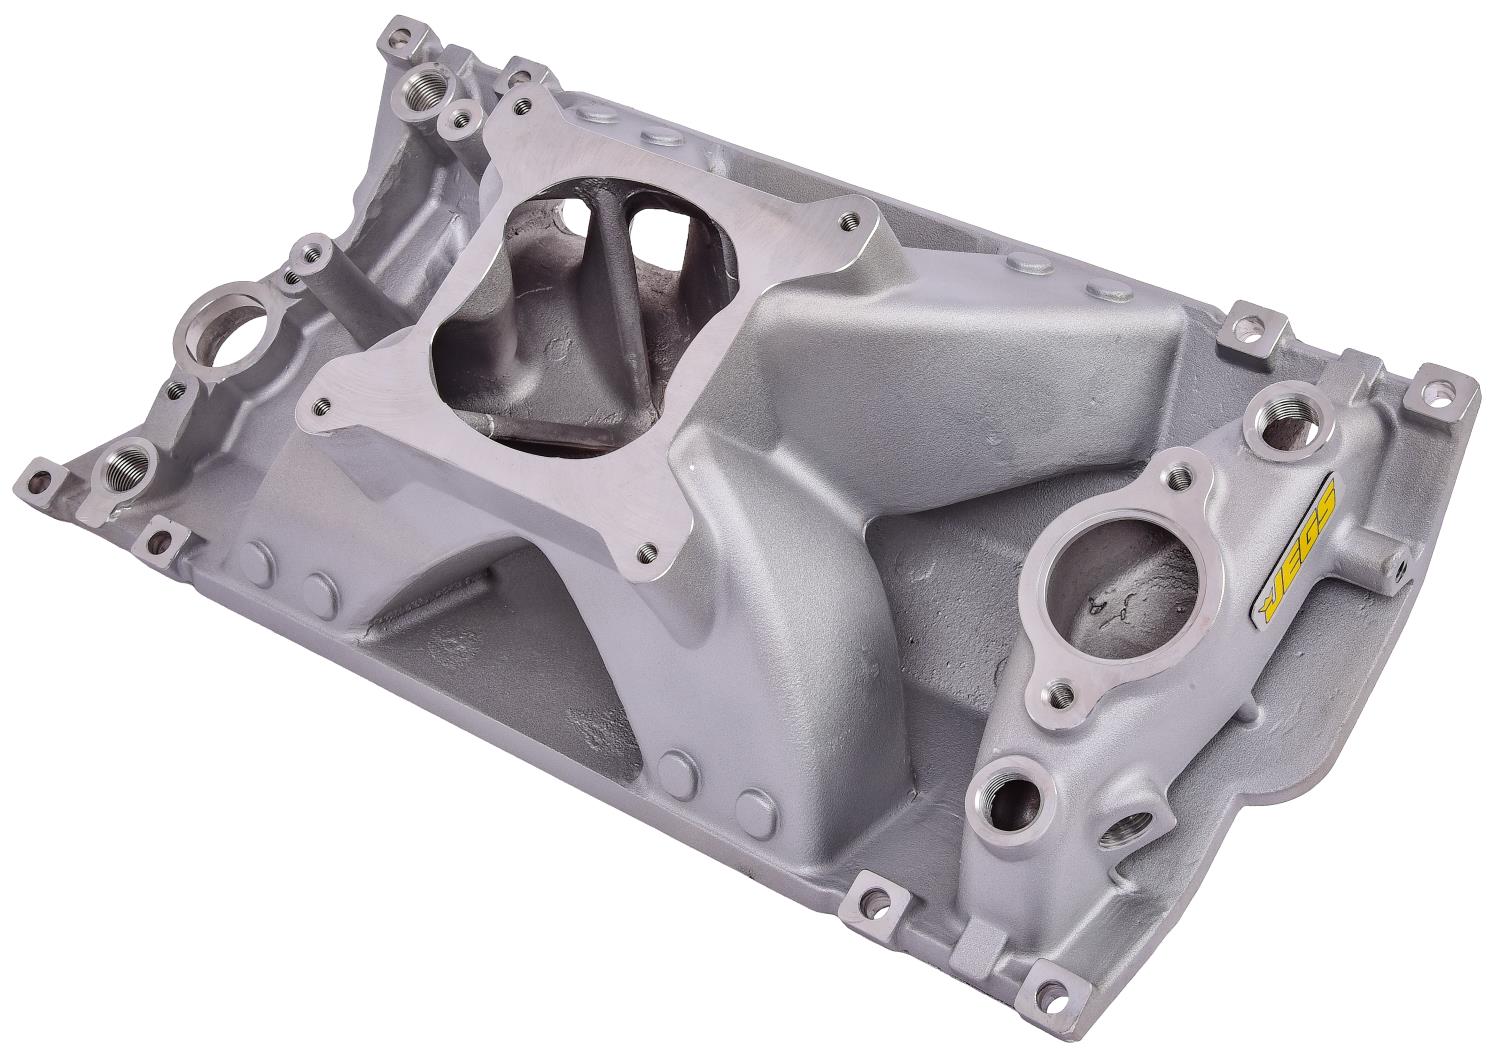 Intake Manifold for 1996-2002 Small Block Chevy 350